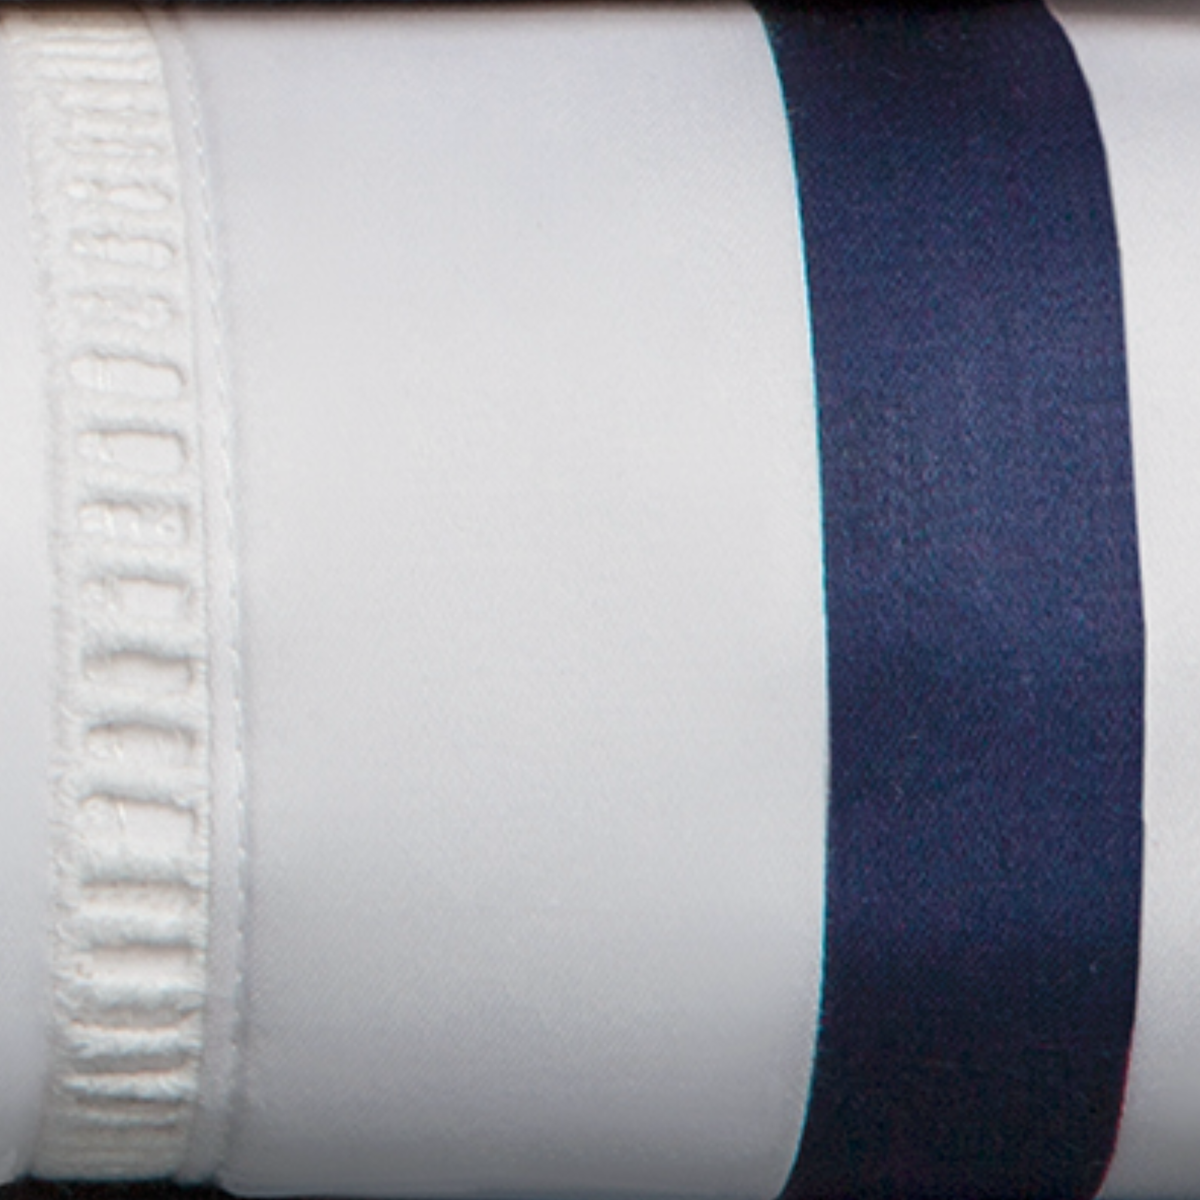 Swatch Sample of Downtown Company Chelsea Bedding in White Navy Color